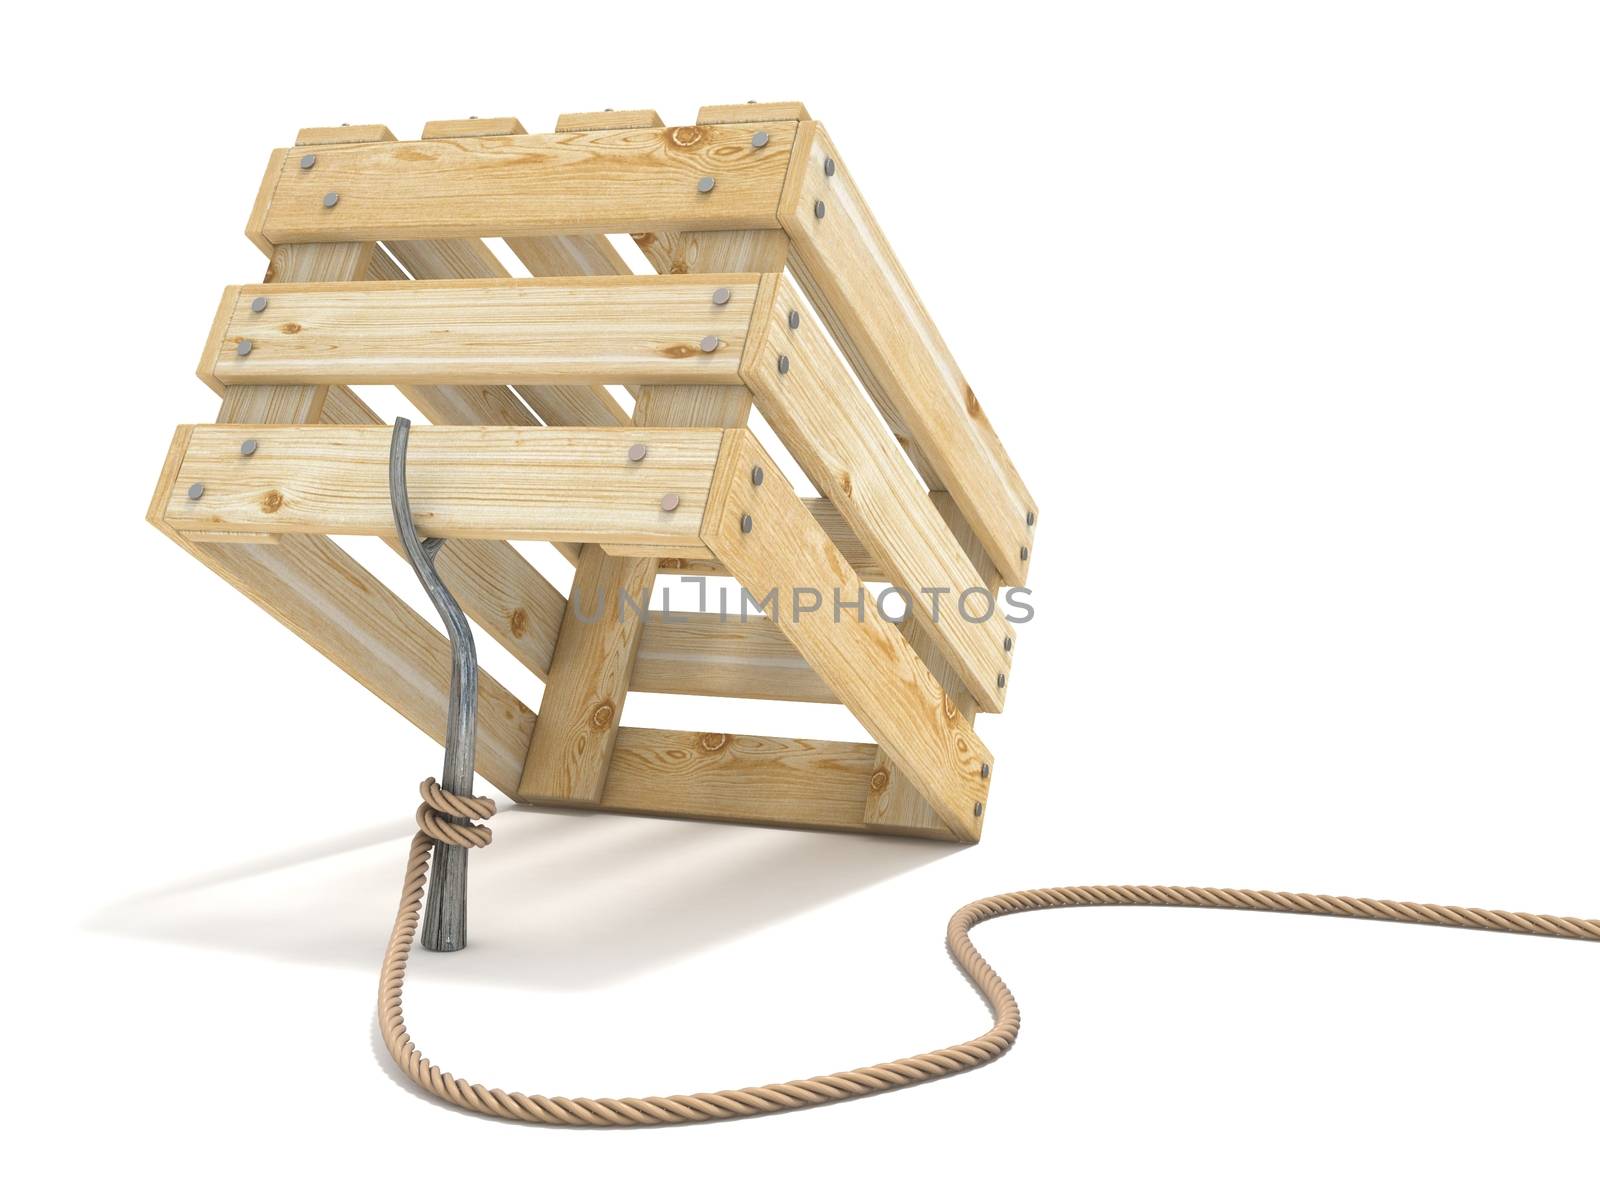 Trap made of wooden crate and rope tide to stick 3D render illustration isolated on white background